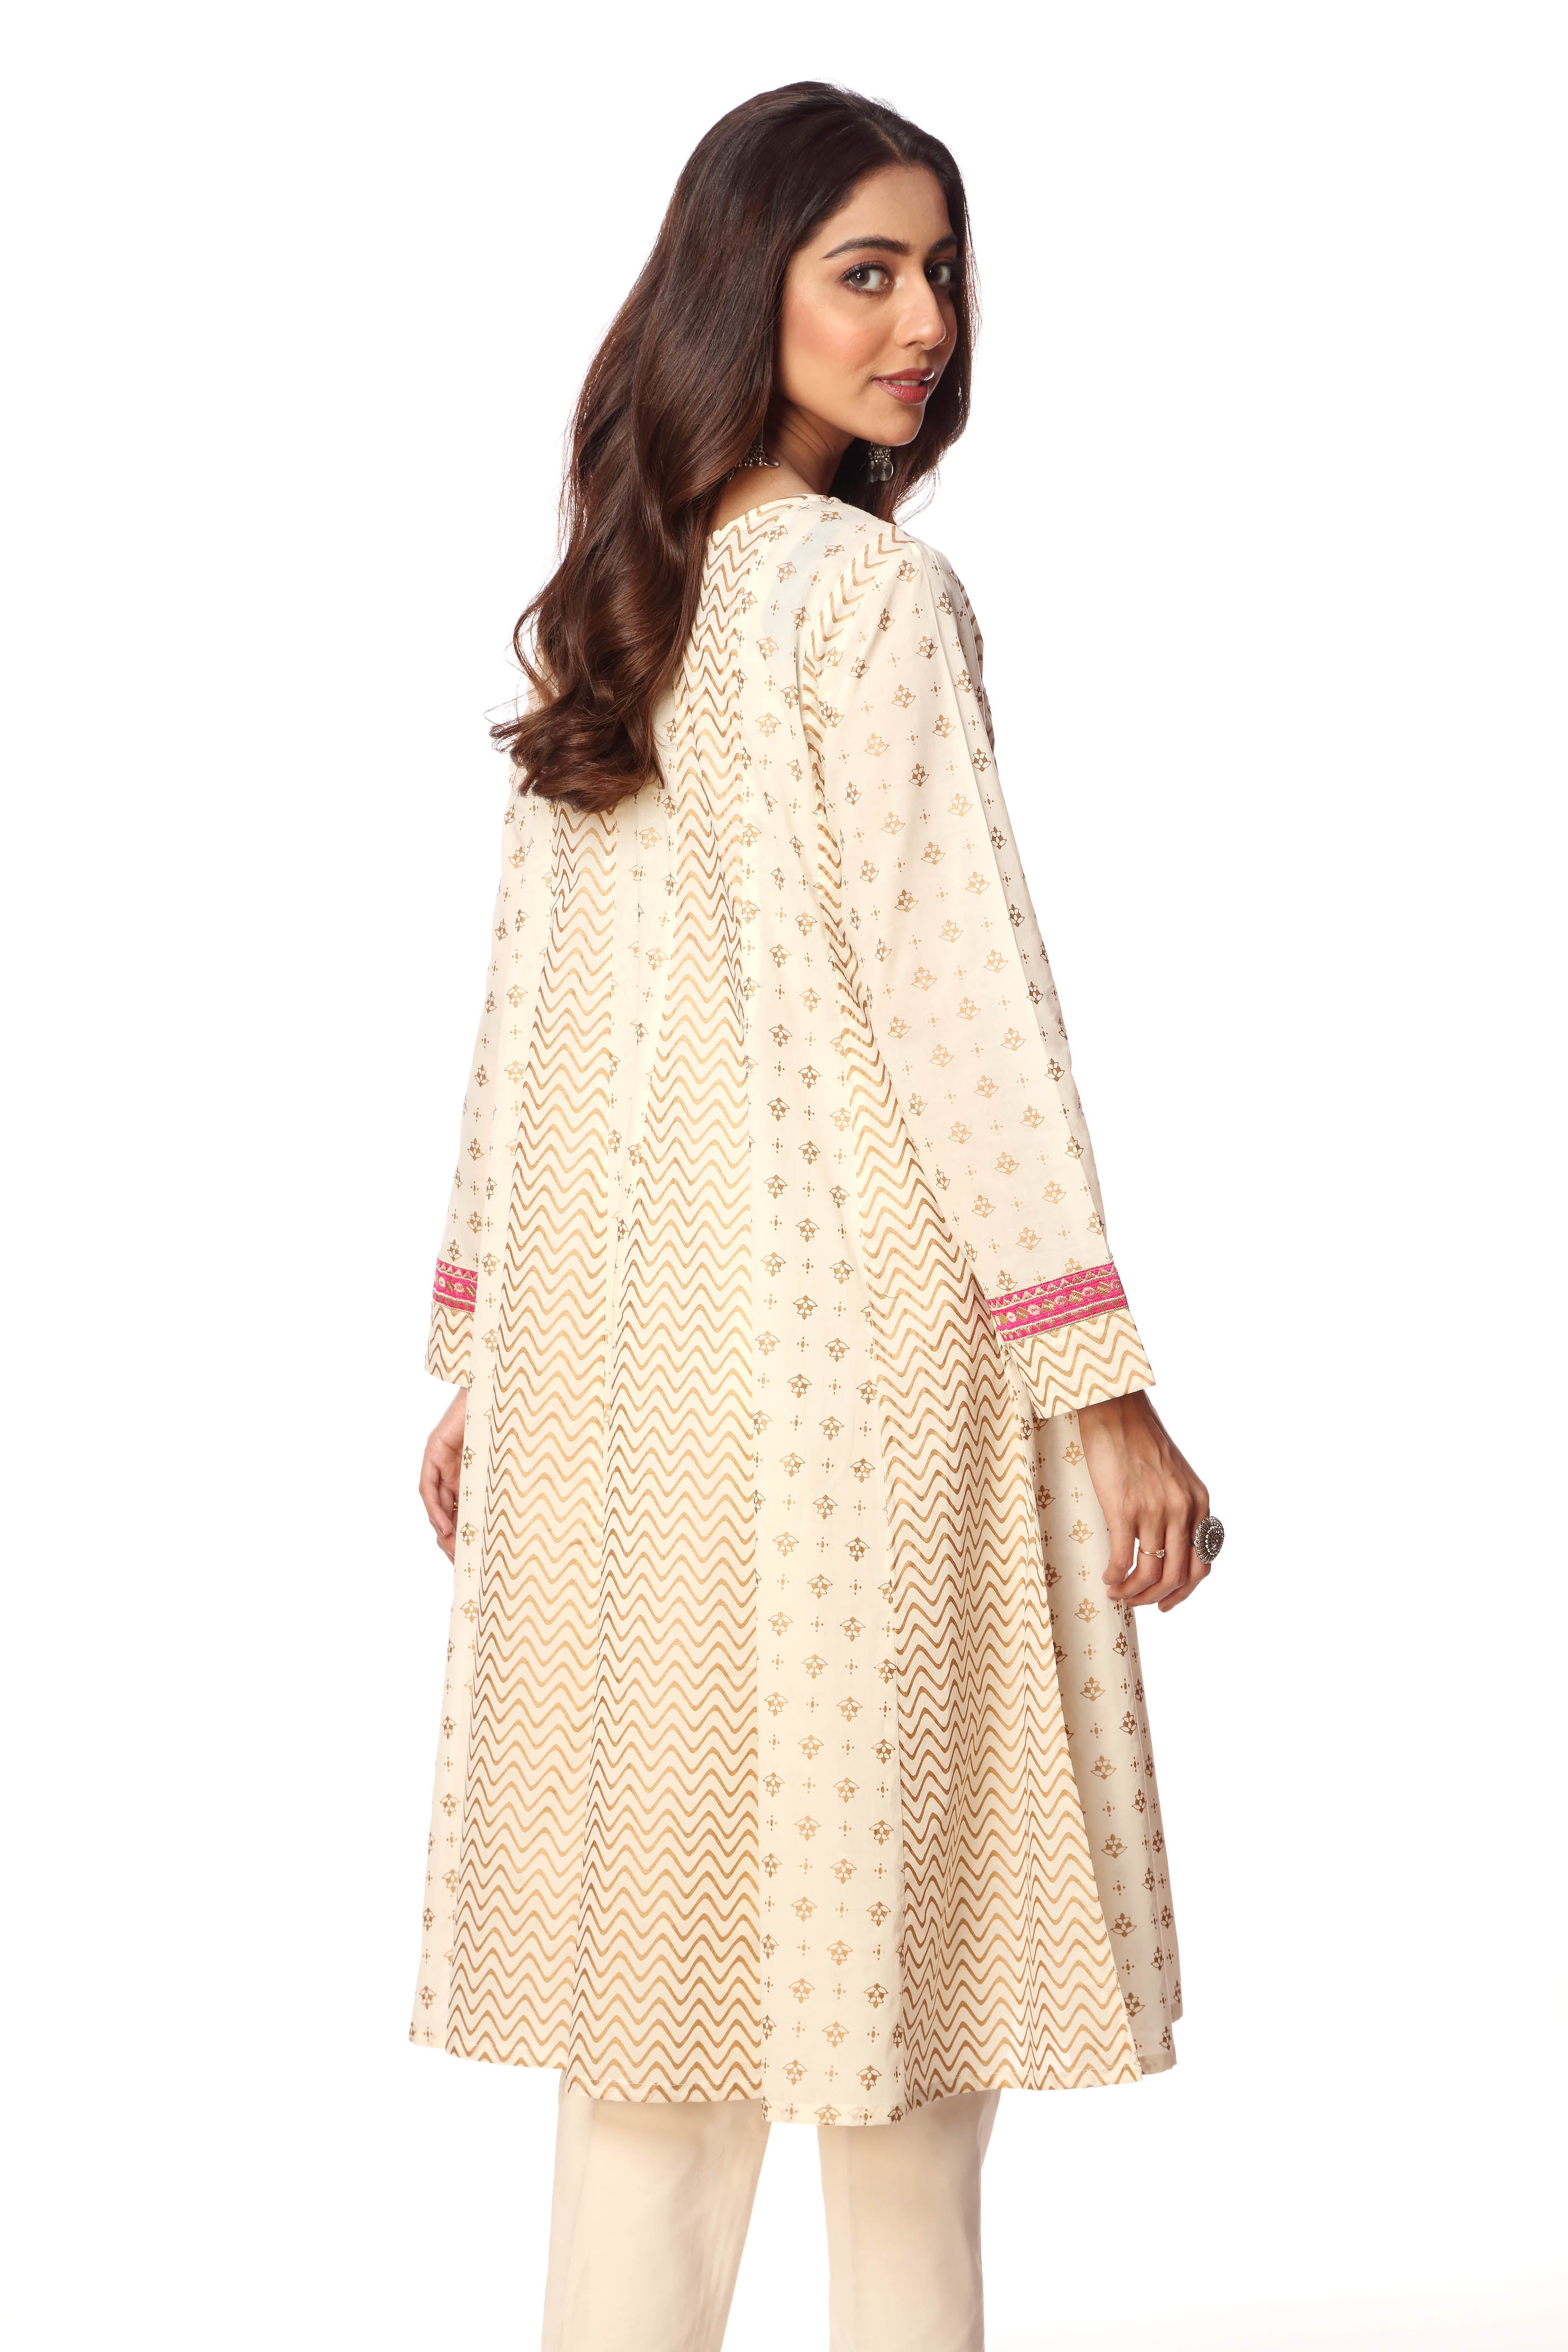 Pink Patti Frock in Off White coloured Printed Lawn fabric 3